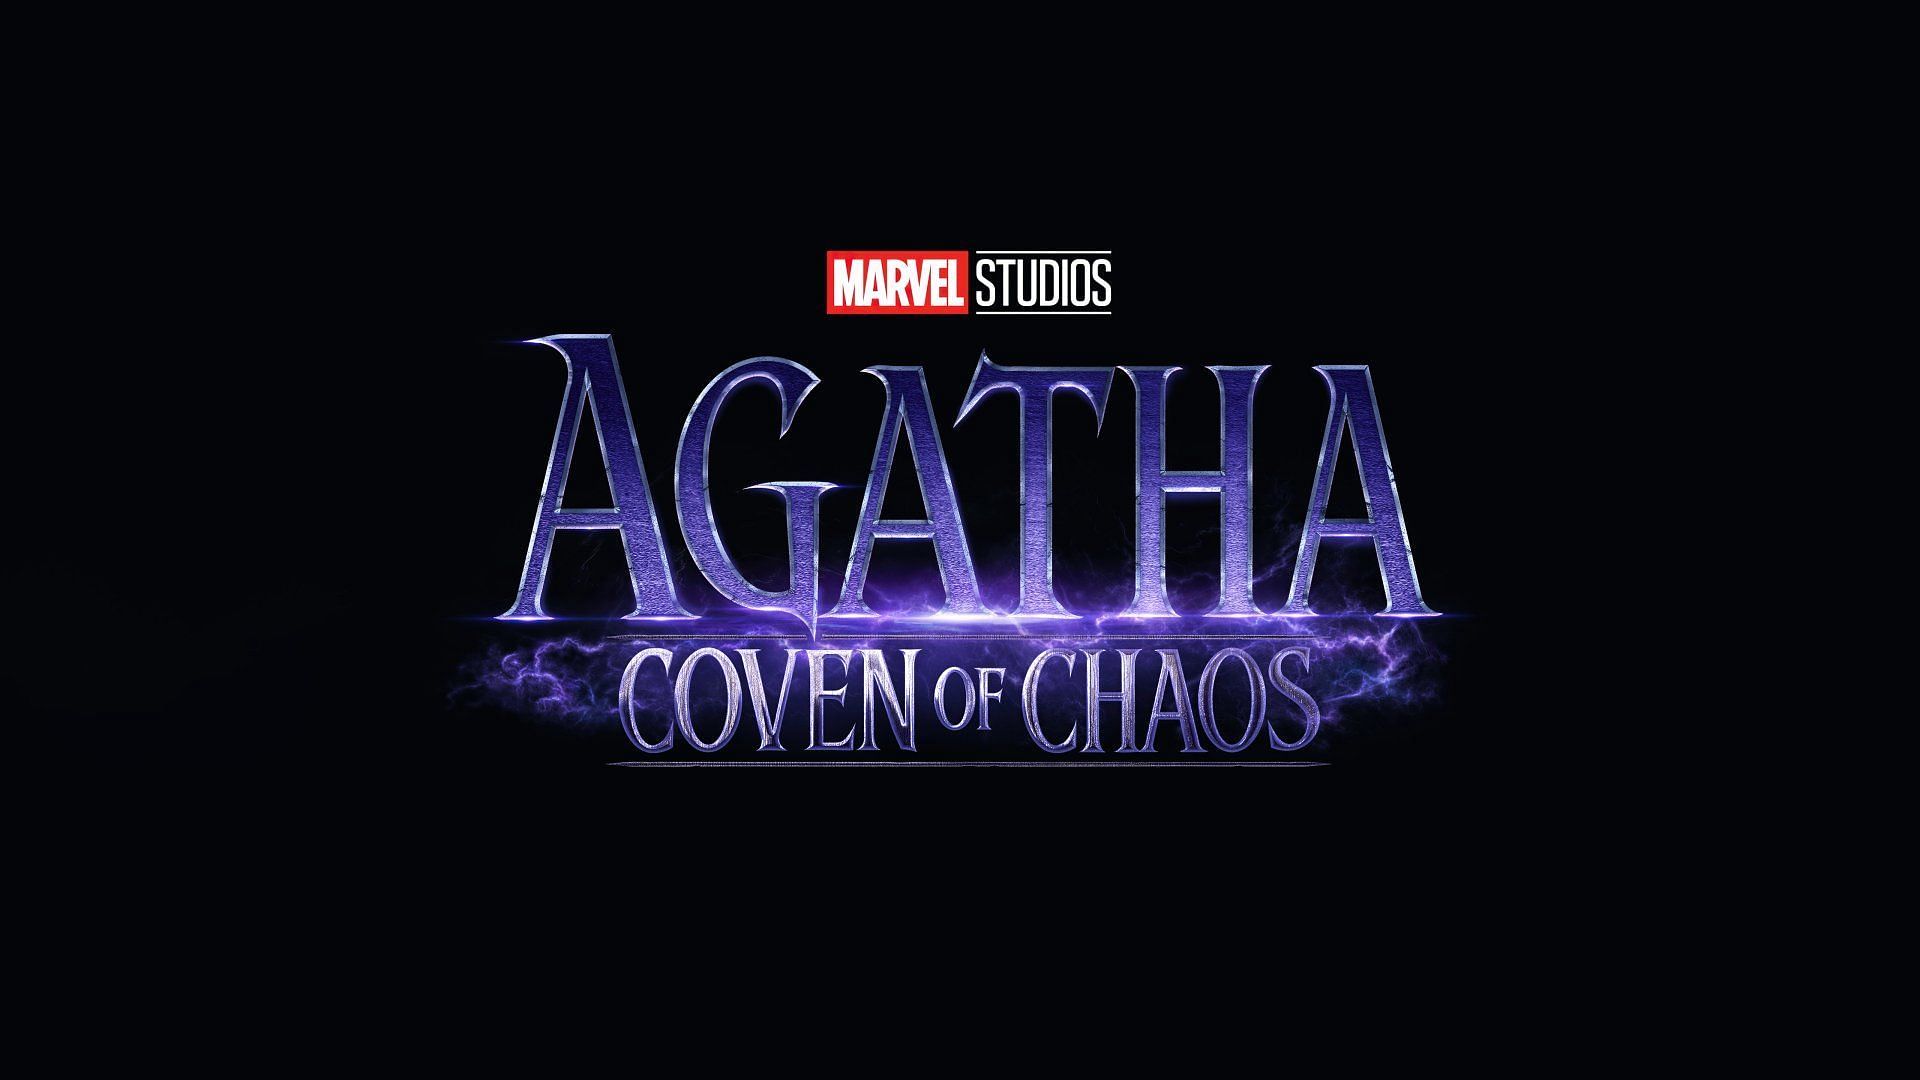 Agatha: Coven of Chaos is a spin-off series by Marvel Studios connected to the Disney+ show WandaVision. (Image via Marvel)